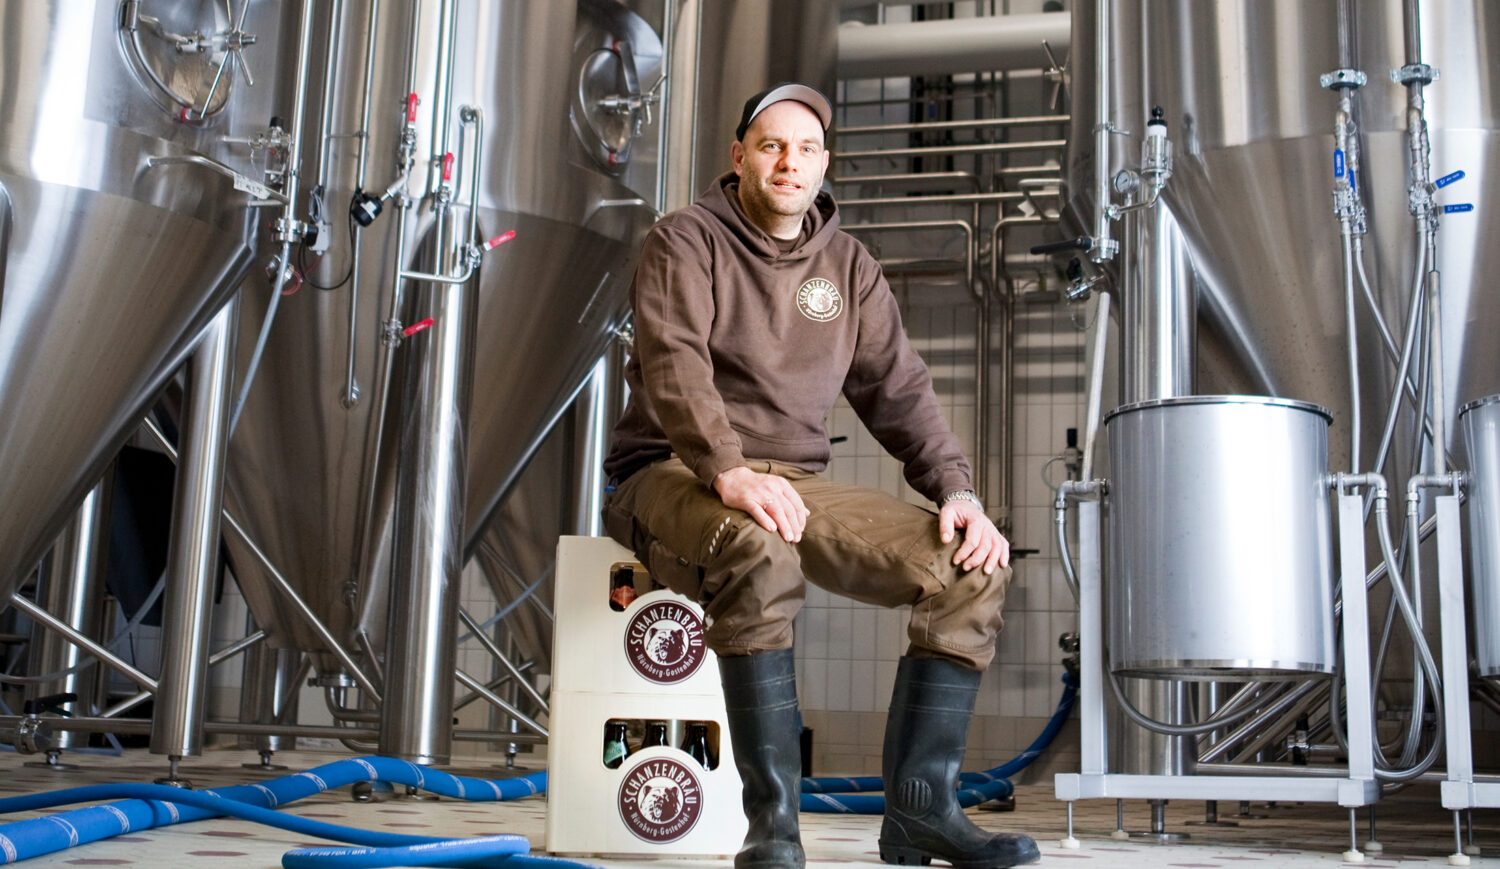 Stefan Stretz is a brewer and brews his own beer in the scene quarter Gostenhof